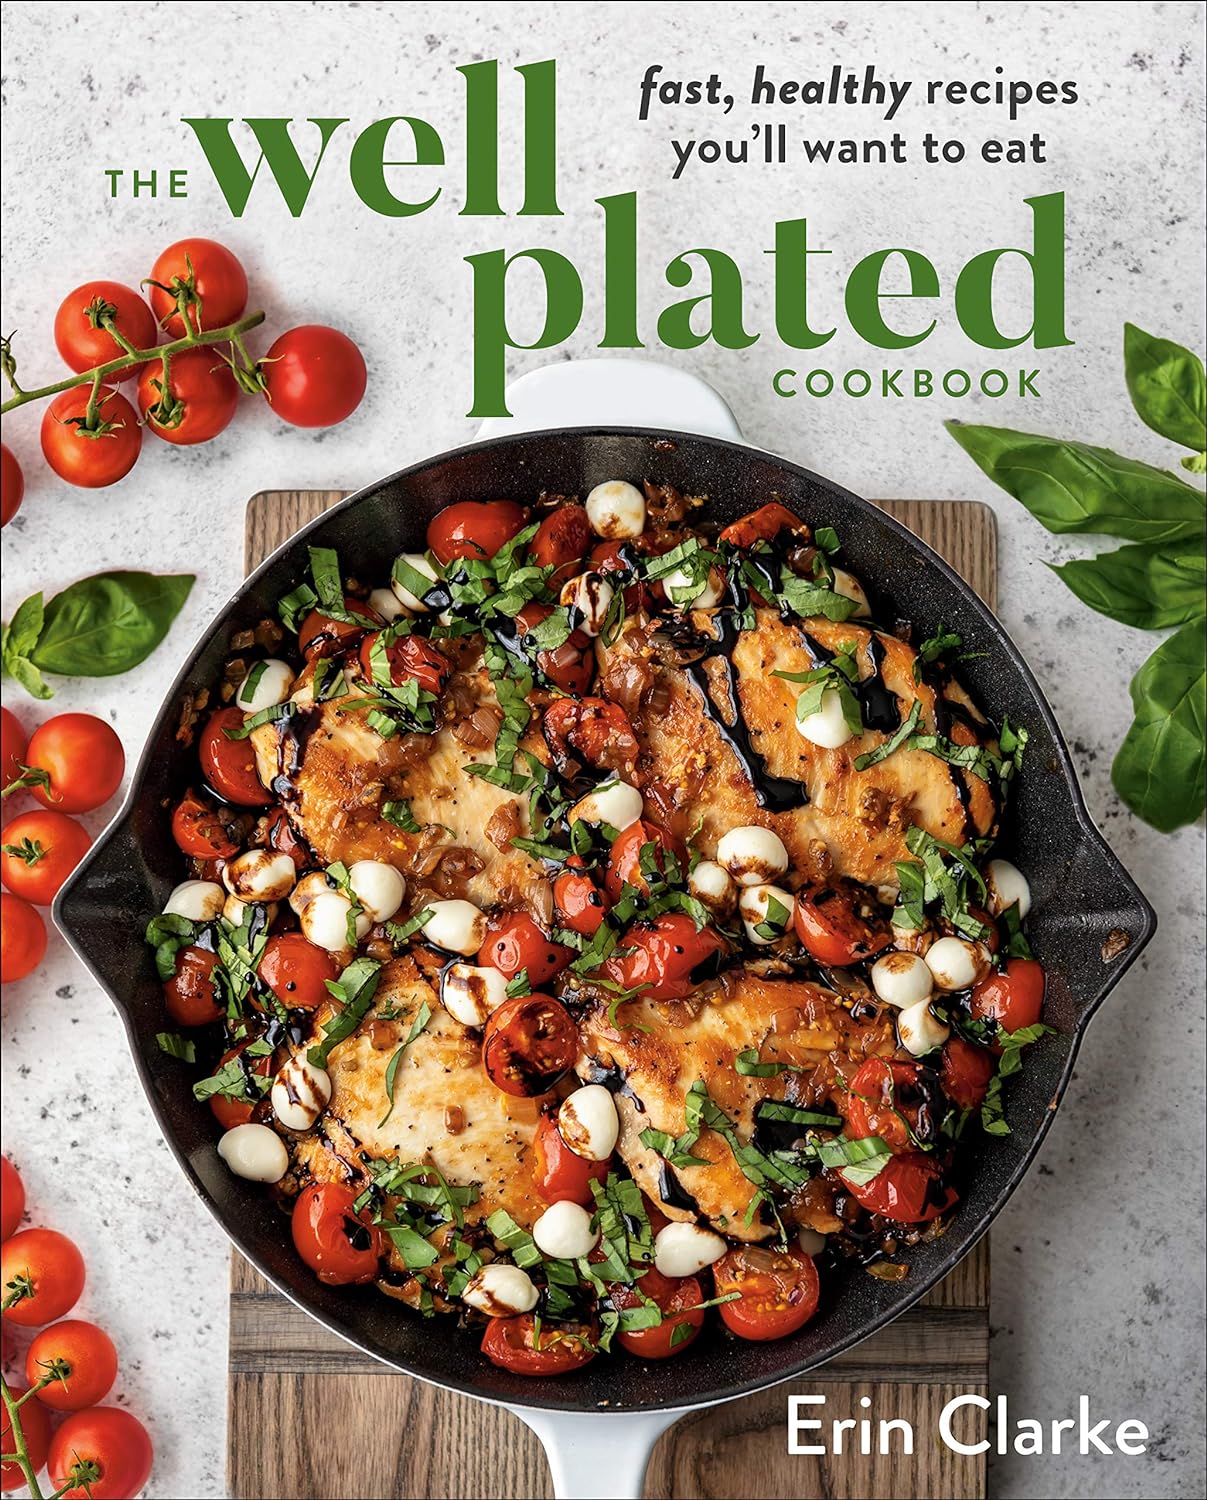 The Well Plated Cookbook: Fast, Healthy Recipes Youll Want to Eat     Hardcover – August 25, 2020